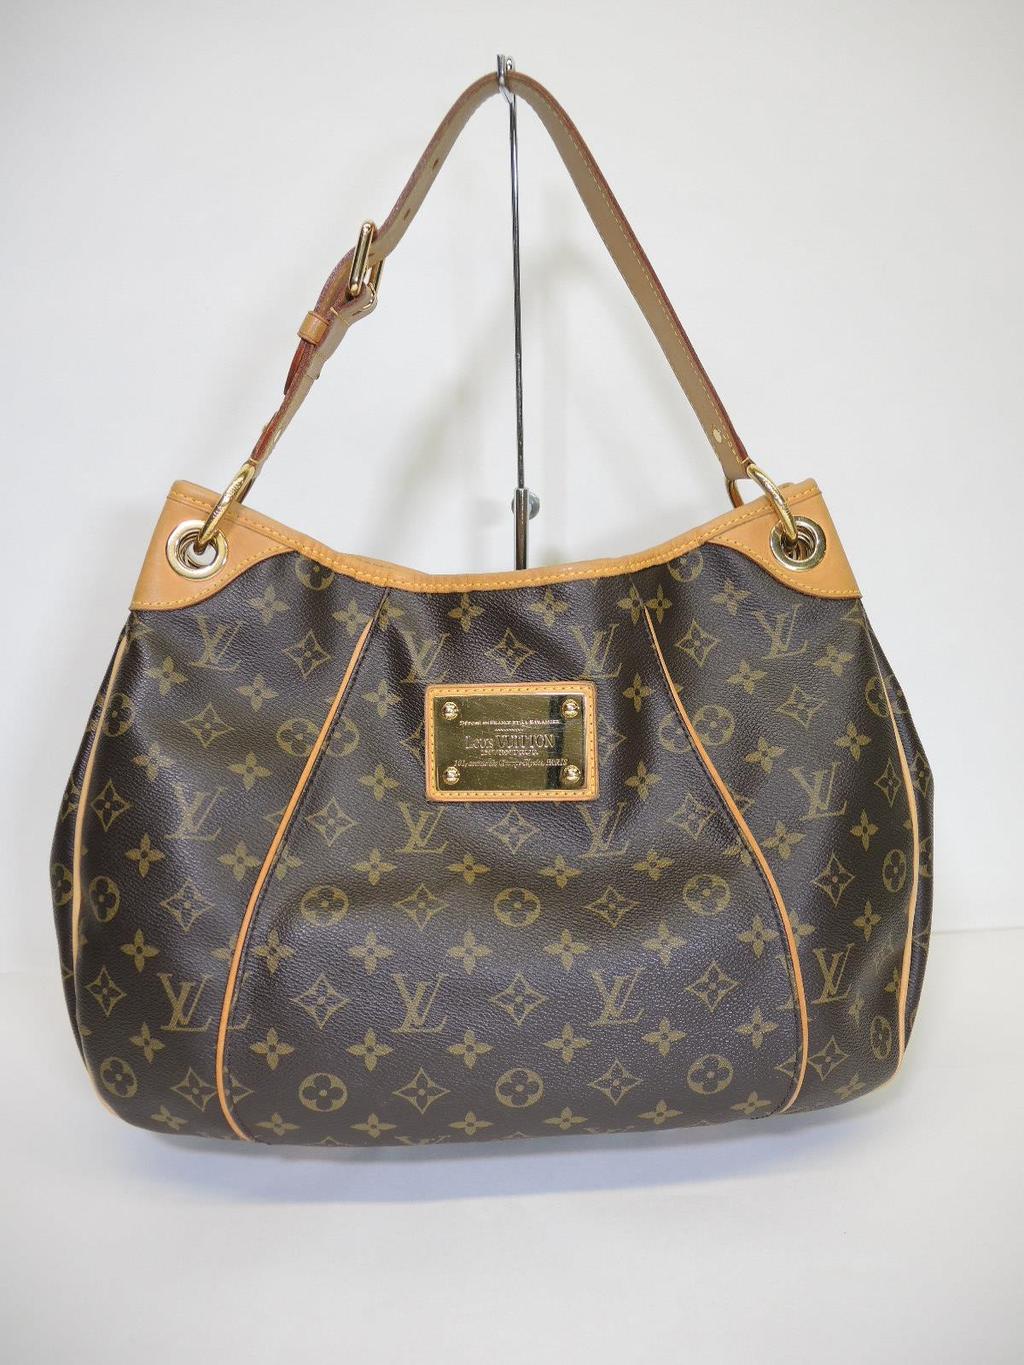 LOUIS VUITTON 'Galleira PM' Monogram Hobo Retailed for $1,680, sold in one day for $799.